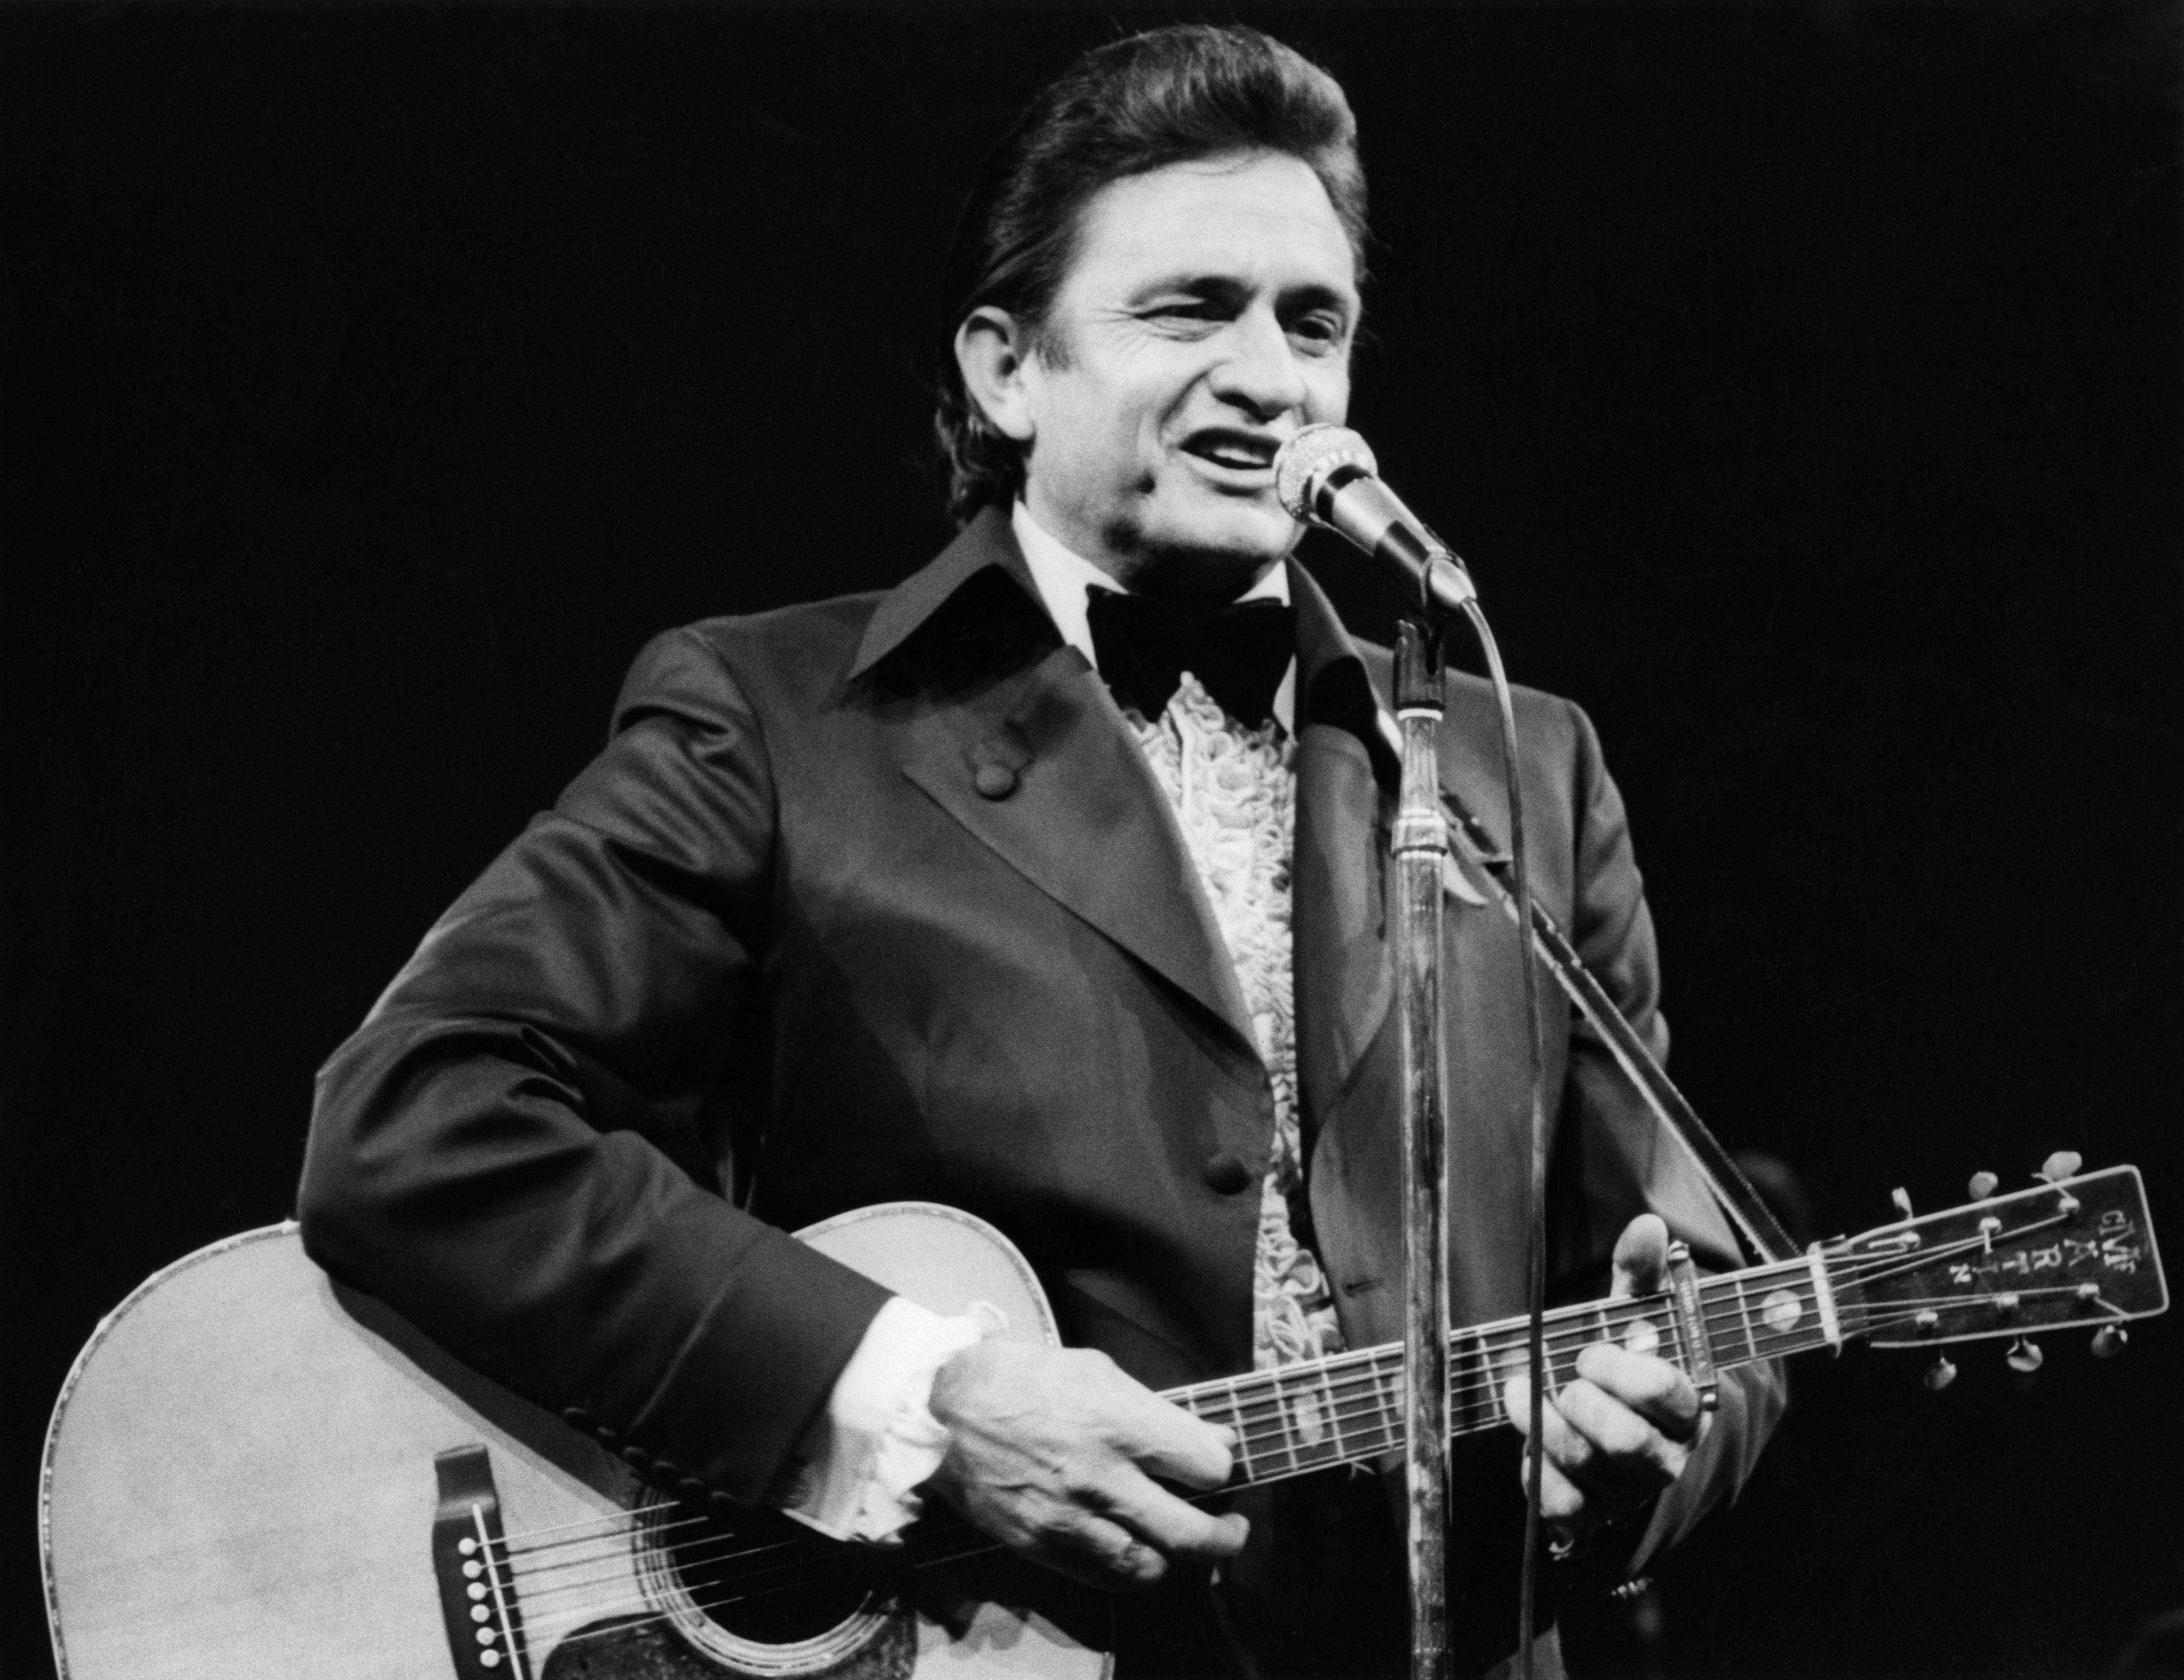 Johnny Cash plays guitar and sings onstage.